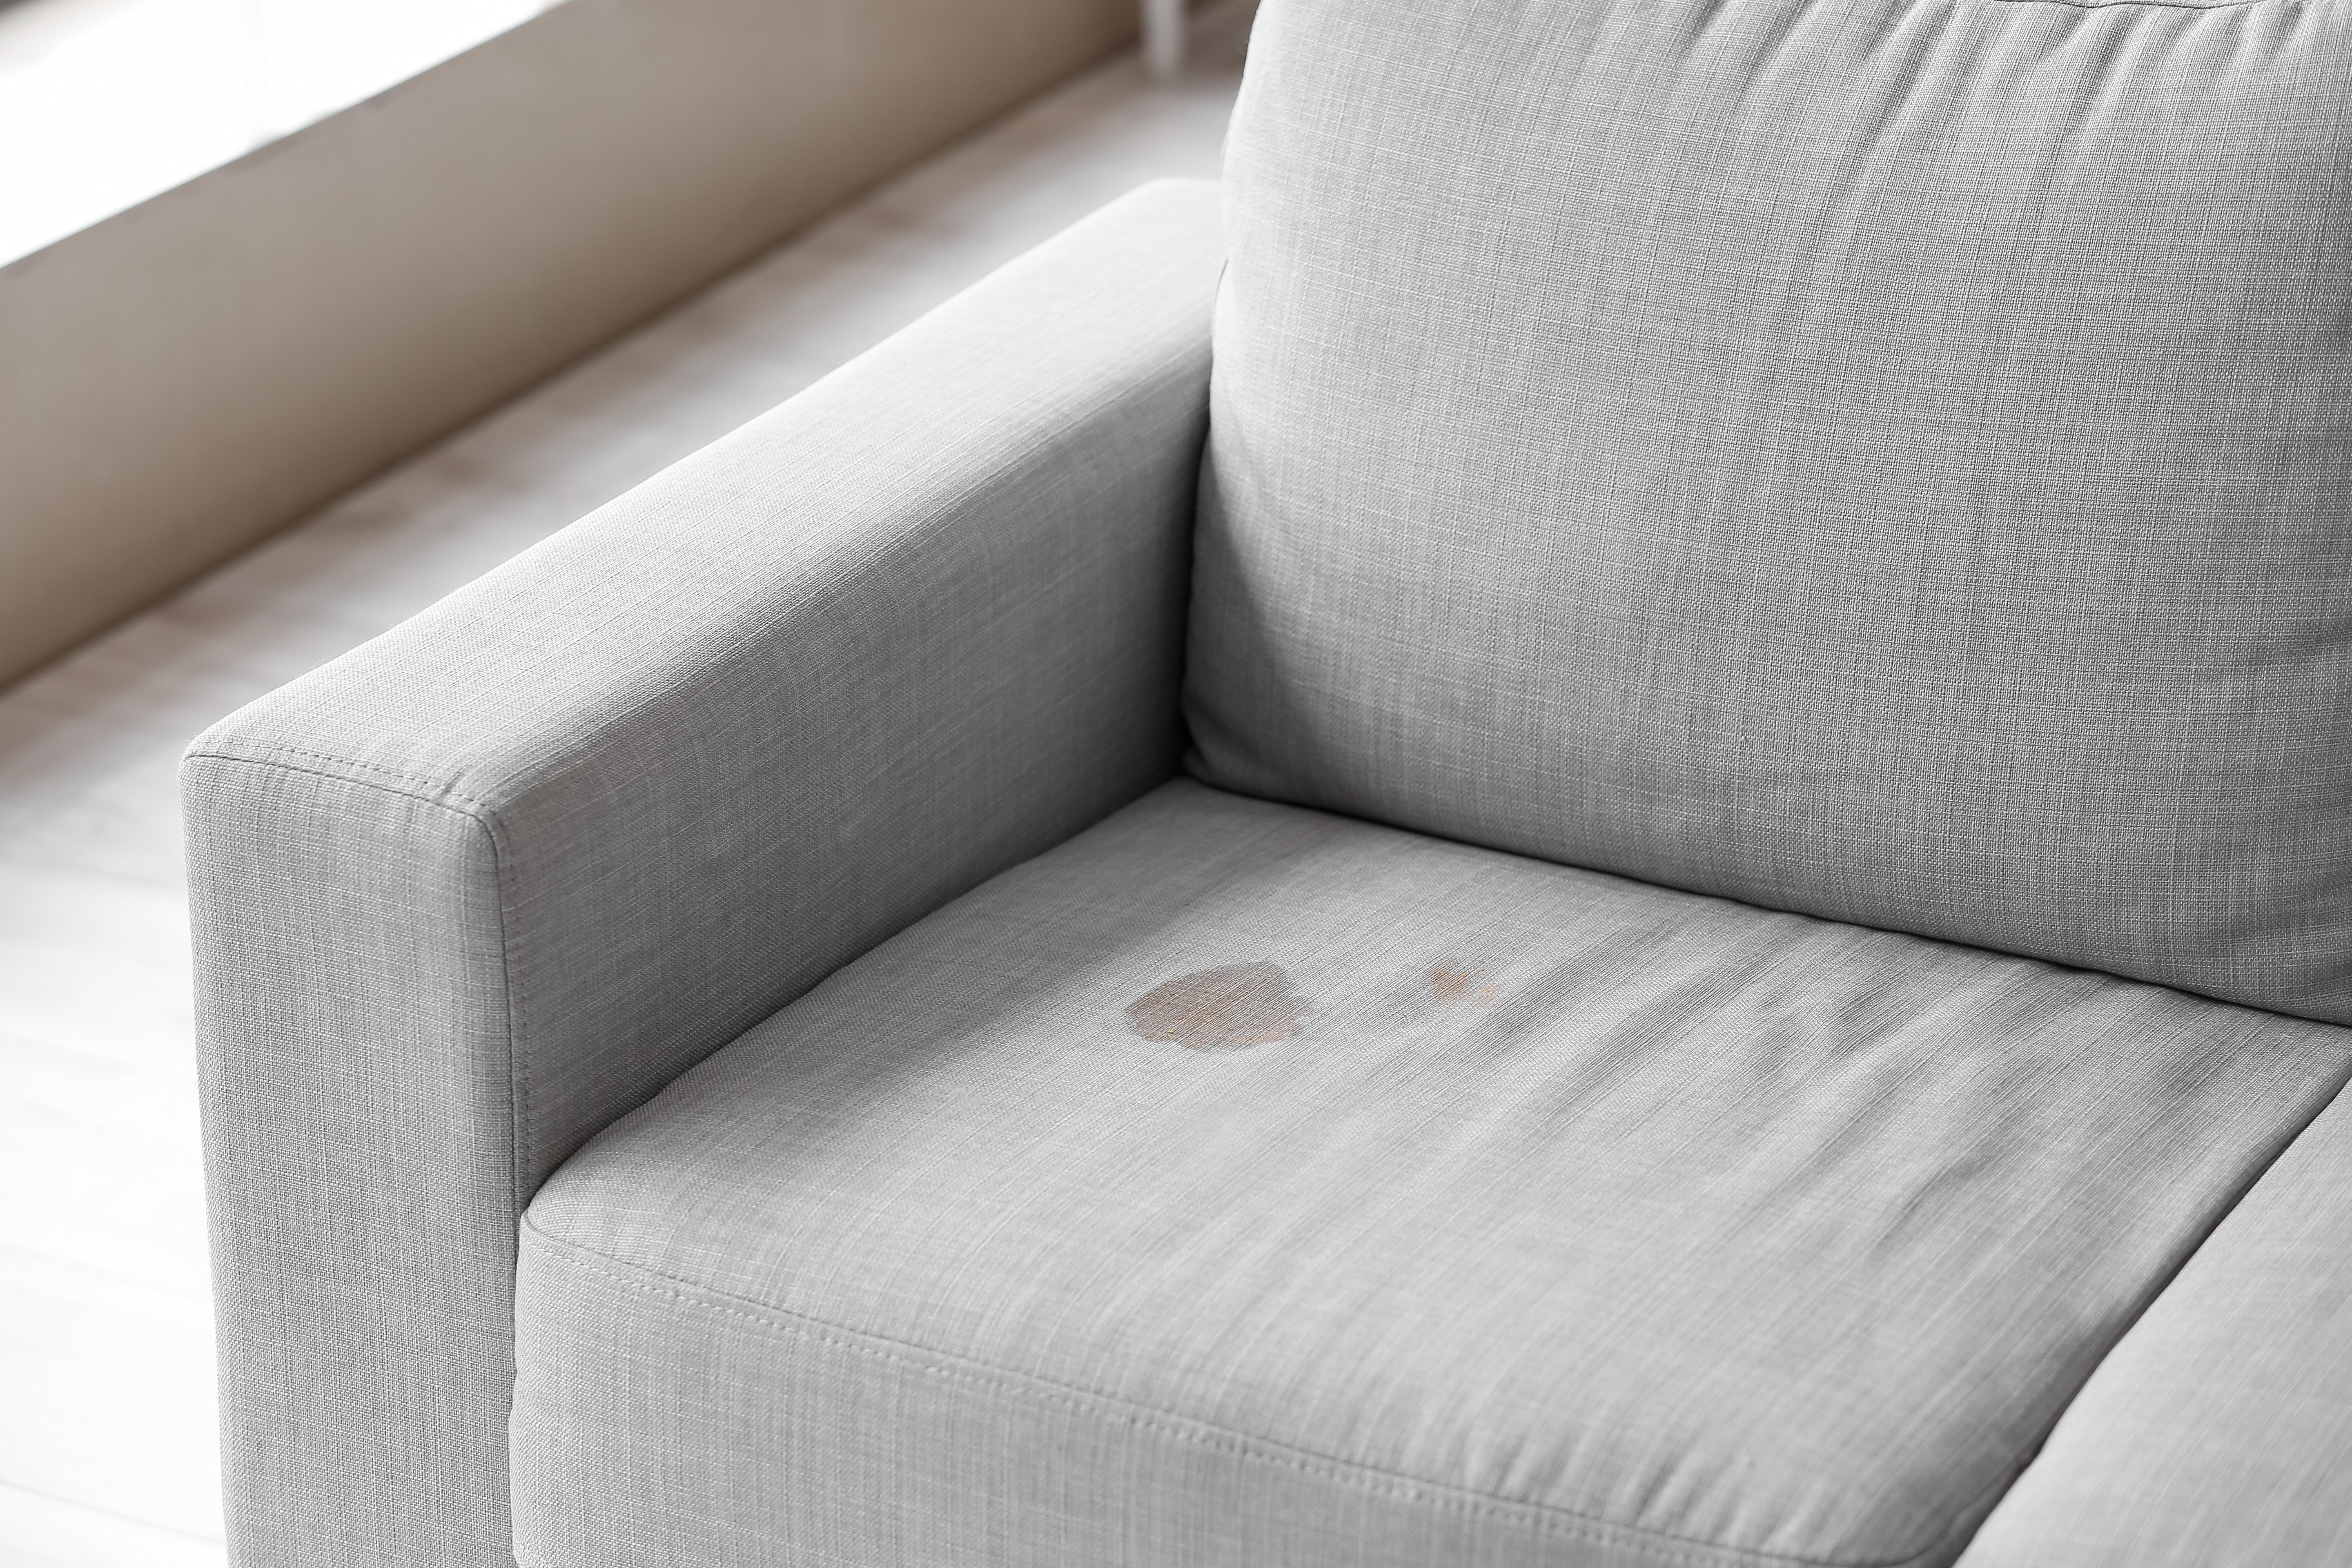 Stain on grey couch